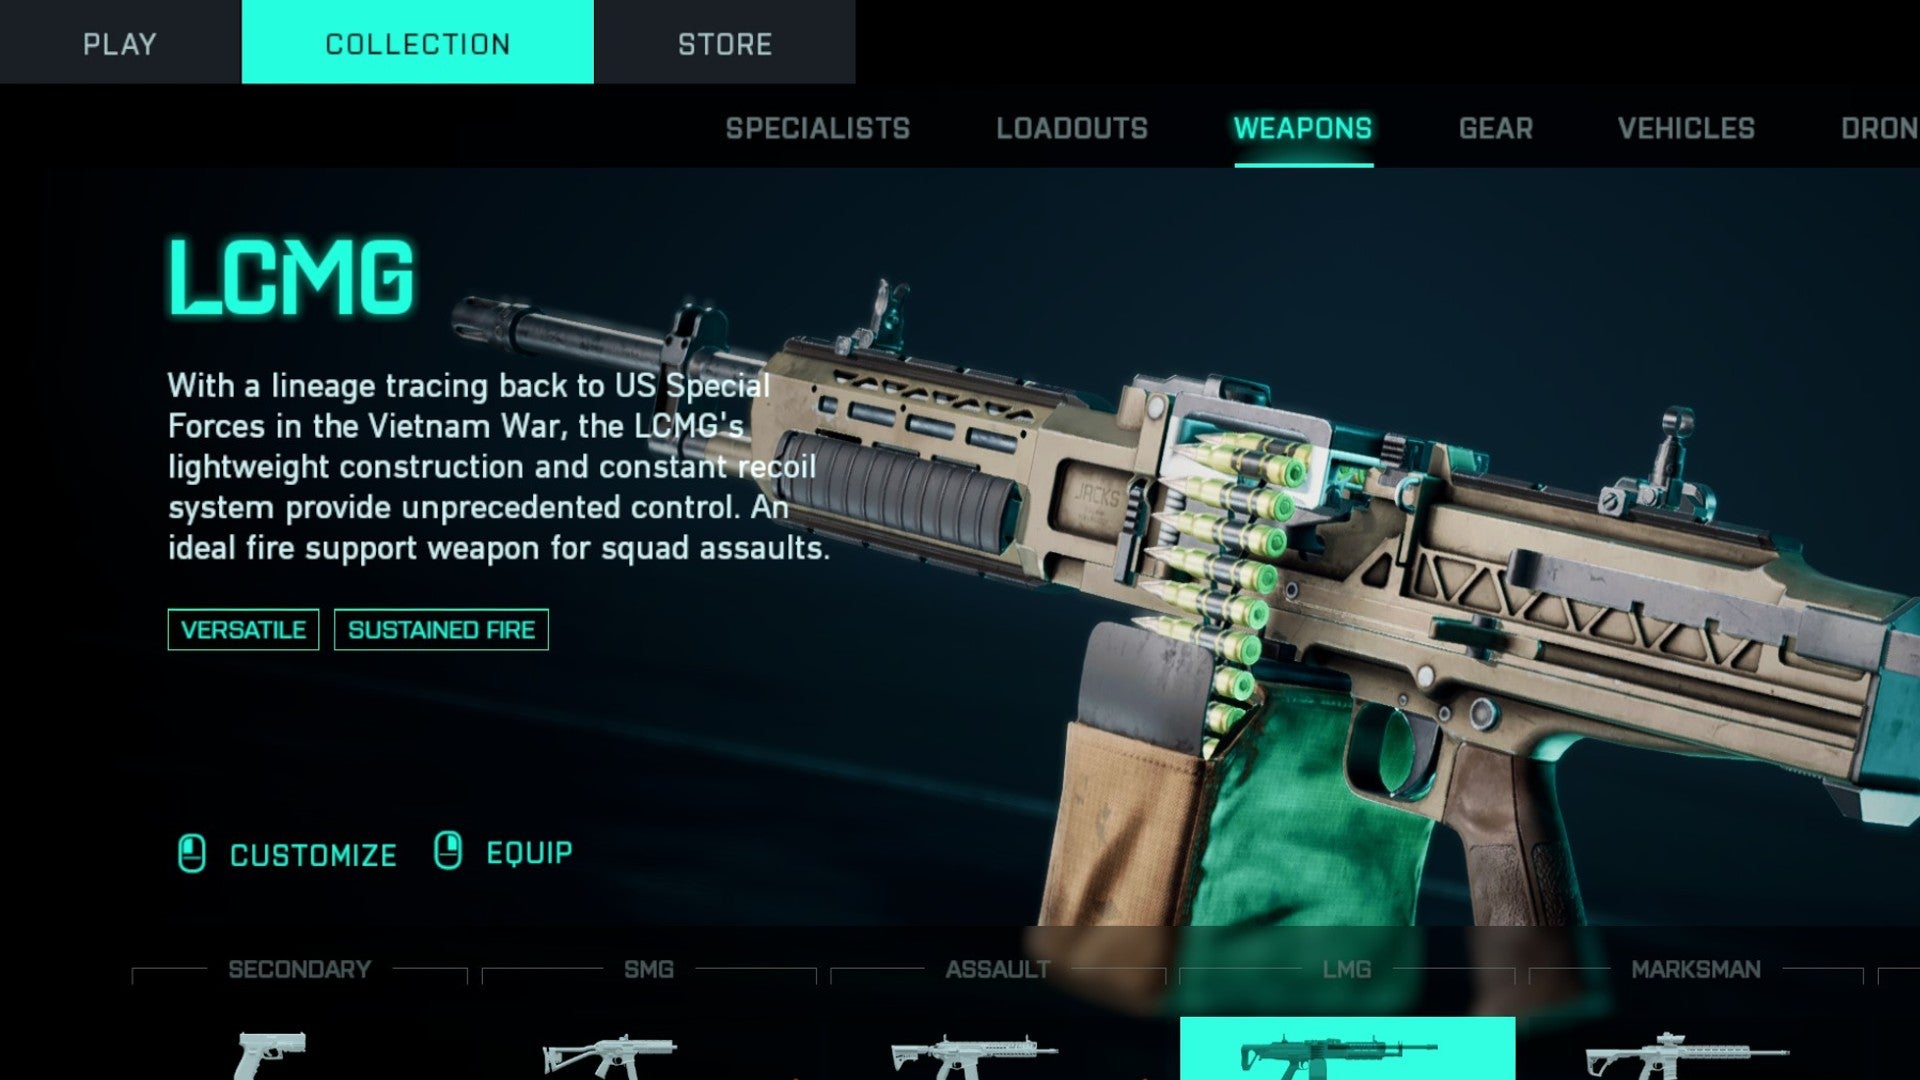 LCMG displayed in the Battlefield 2042 loadout screen. Other weapons can be seen pictured at the bottom. Text on the left describes the LCMG.